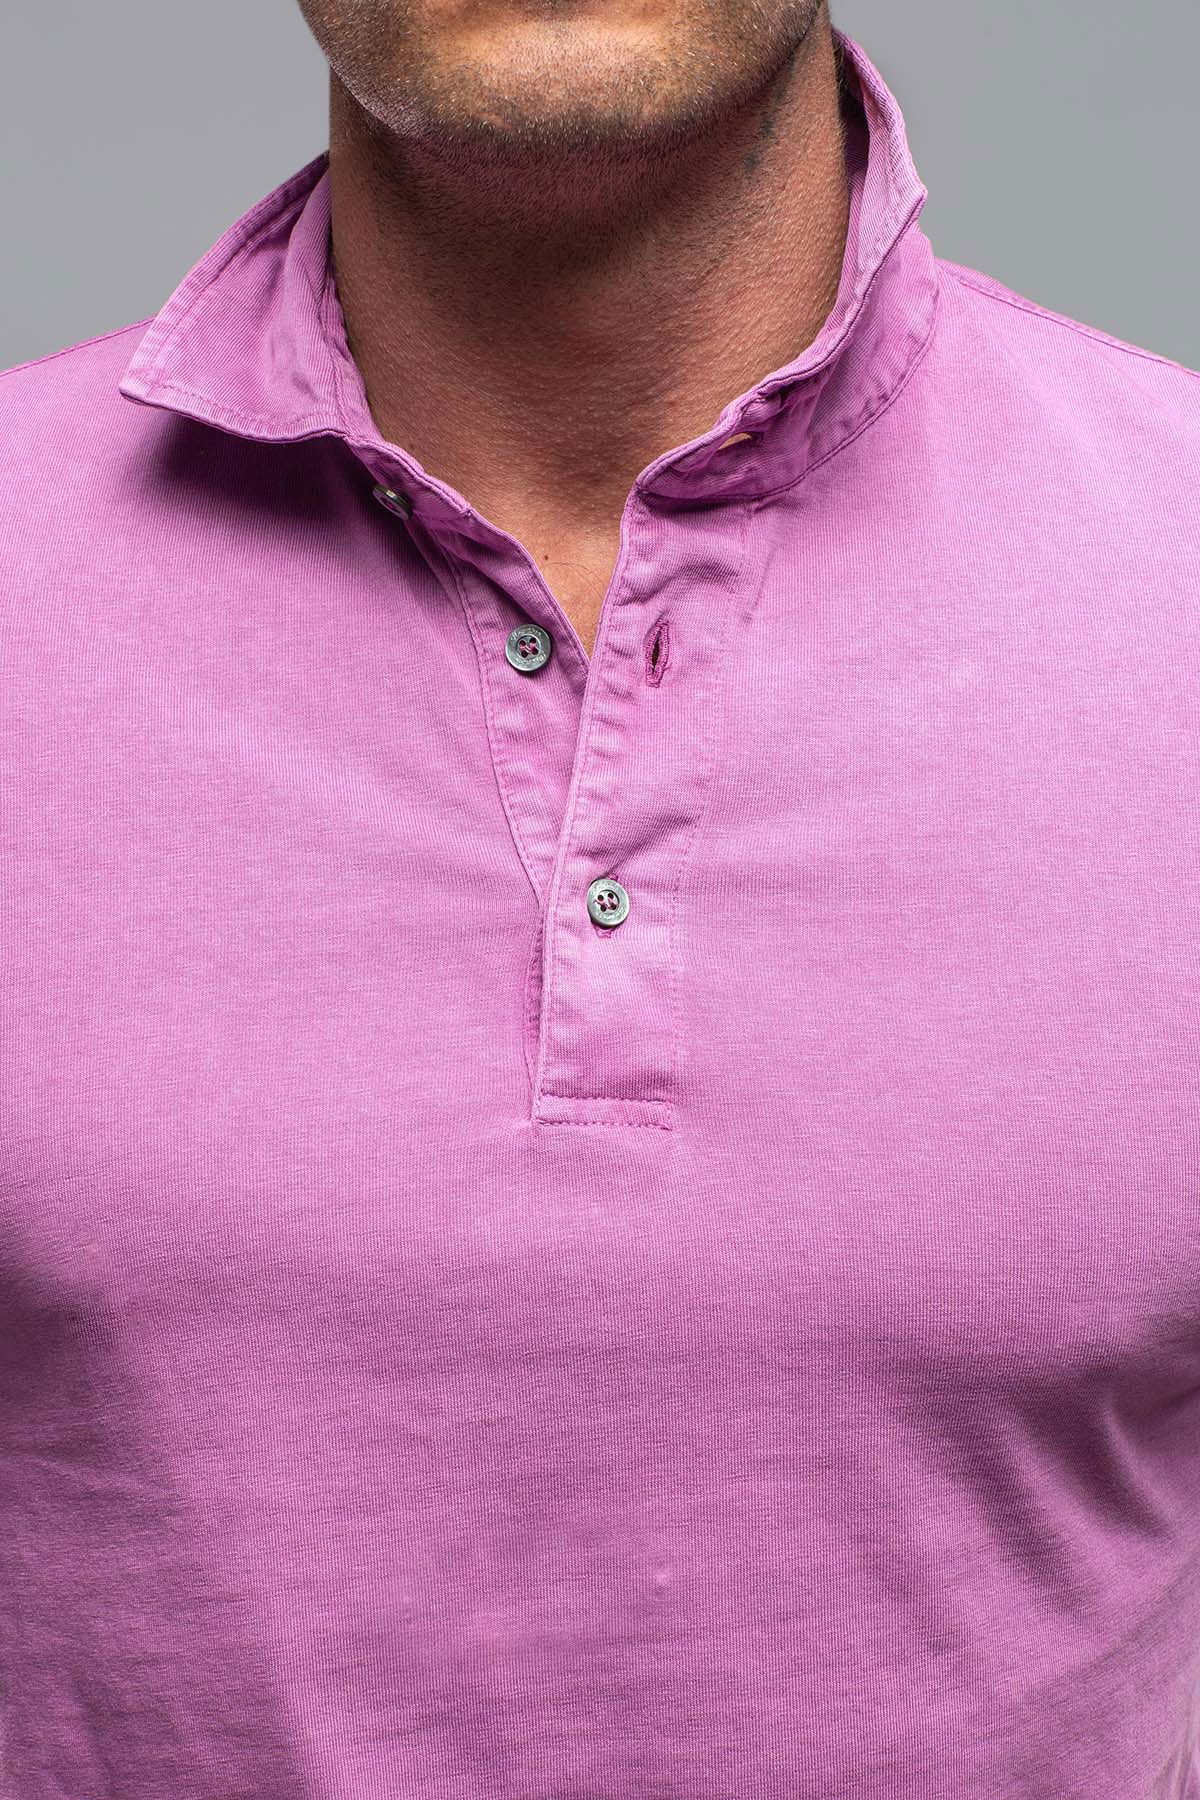 Jerry Cotton Frosted Polo In Bright Pink | Mens - Shirts - Polos | Drumohr